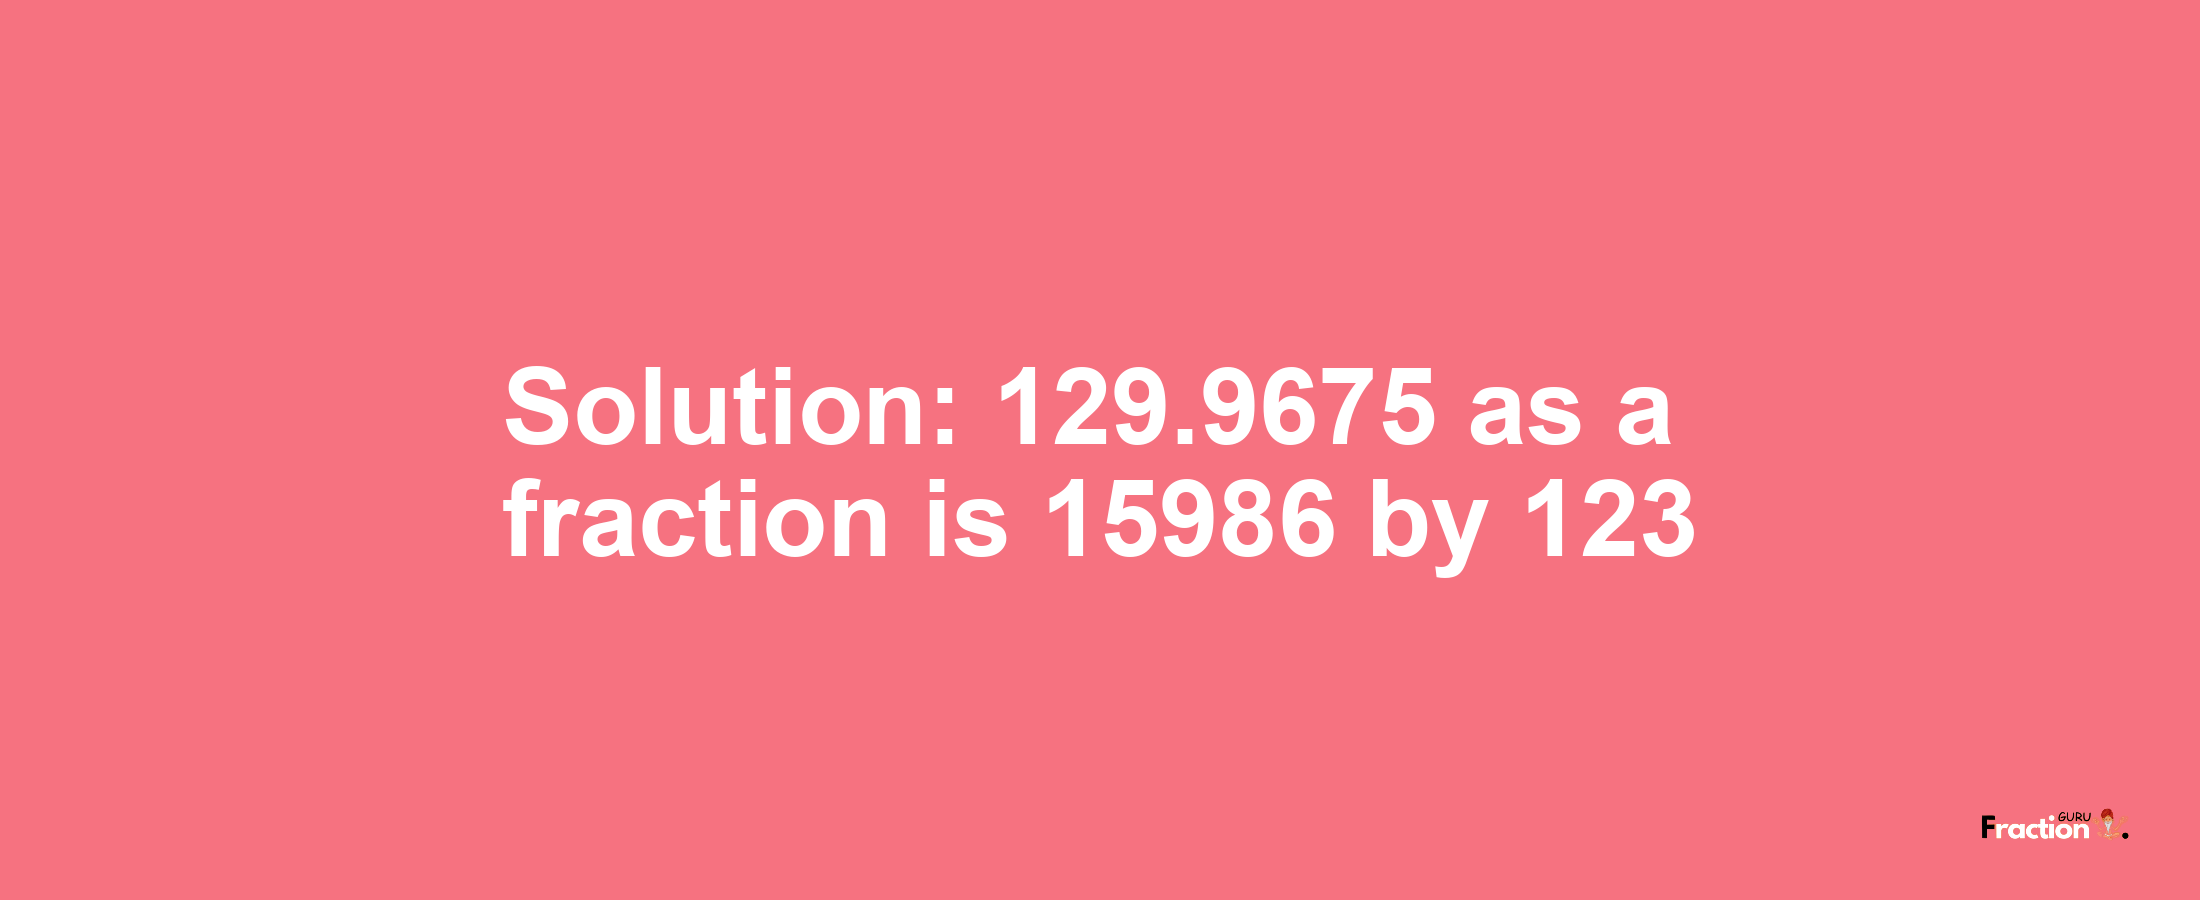 Solution:129.9675 as a fraction is 15986/123